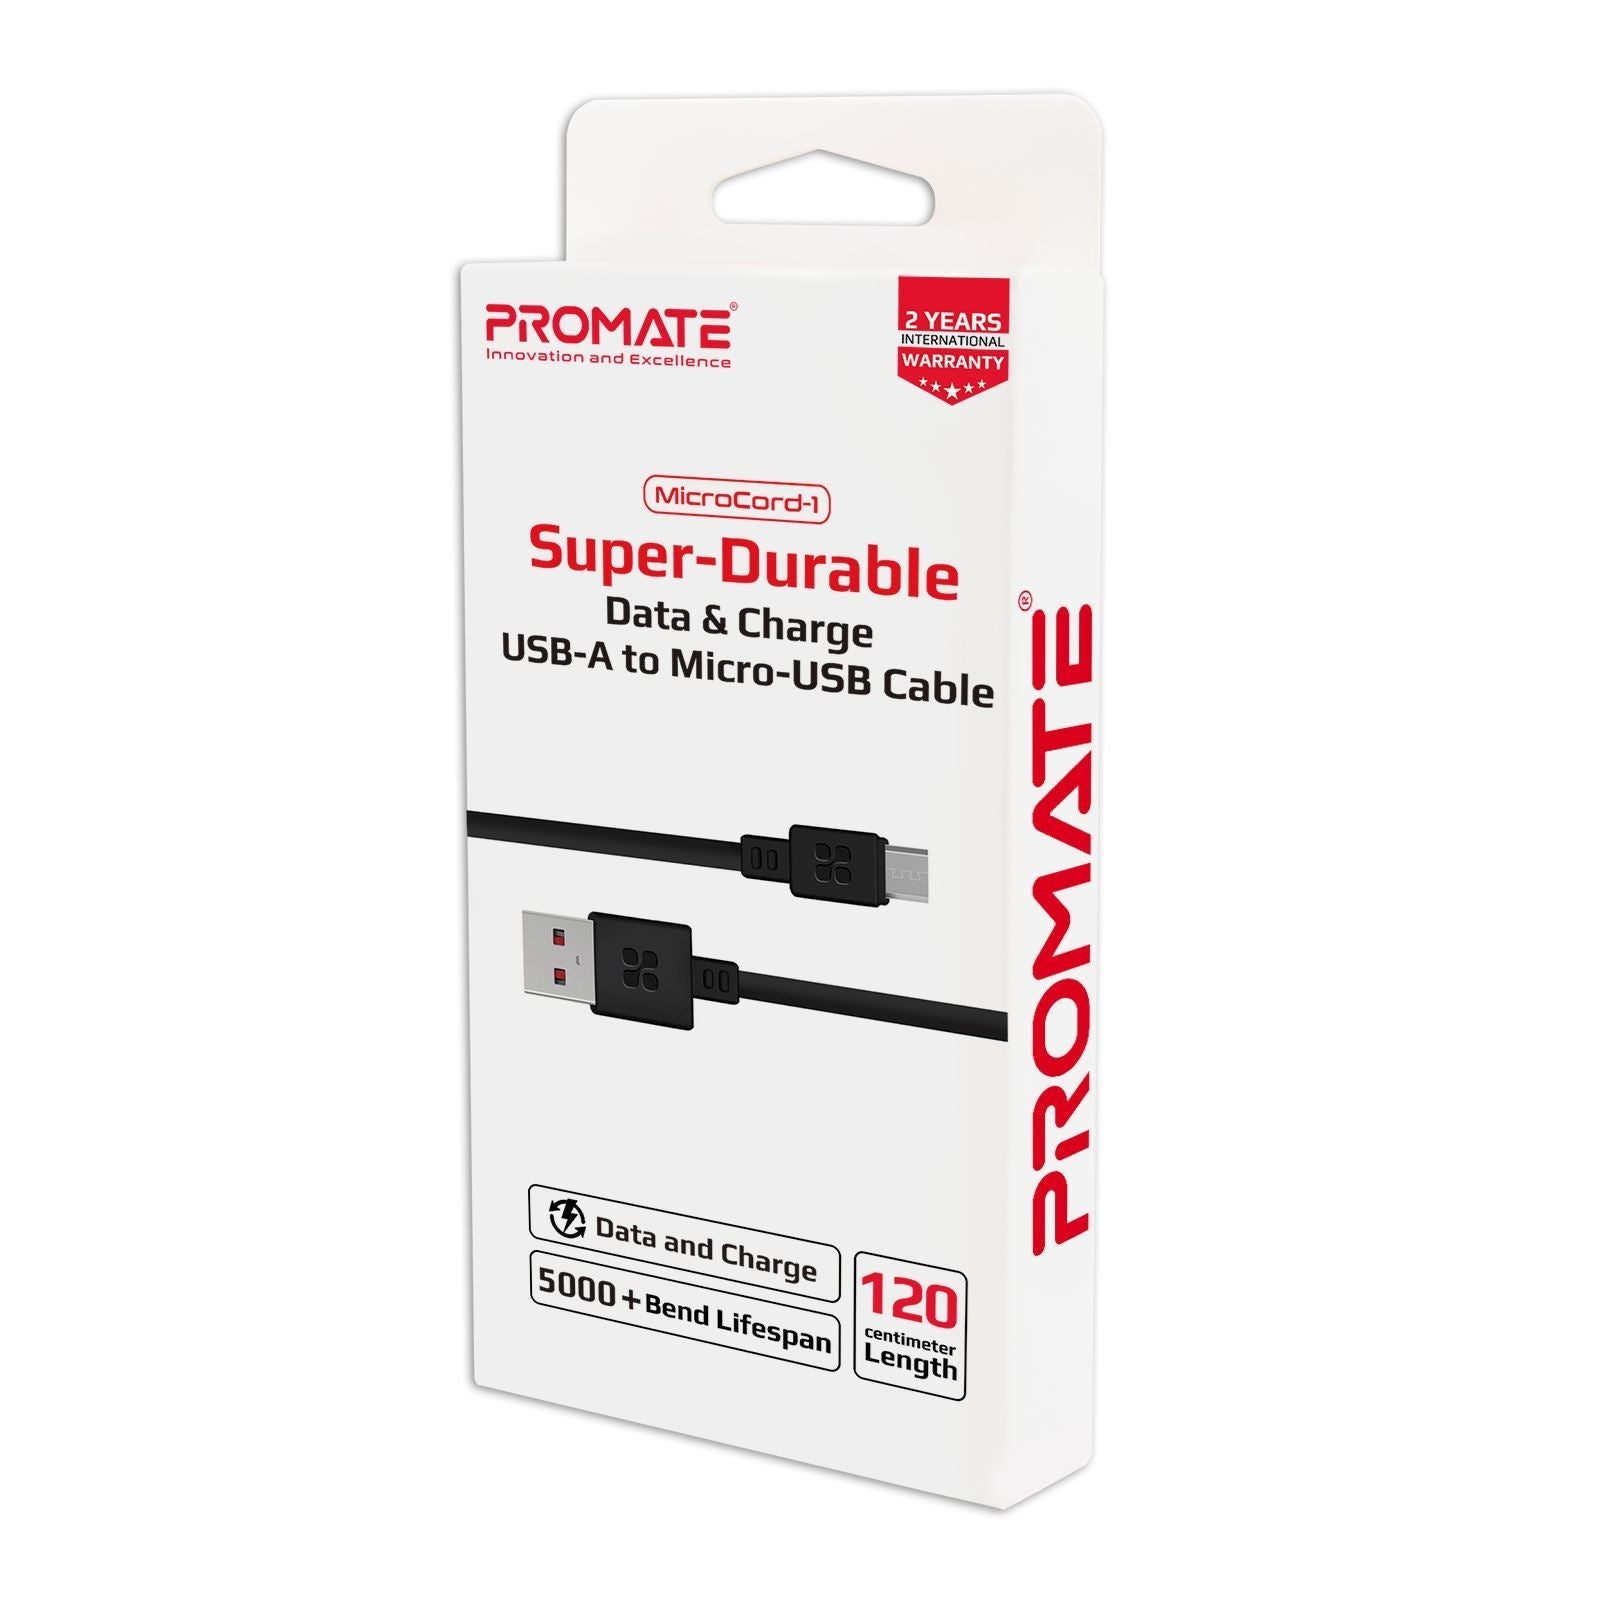 PROMATE_1.2m_USB-A_to_Micro-USB_Data_Sync_&_Charge_Cable._Supports_2A_Charging_&_Data_Transfer_up_to_480Mbps._Black_Colour. 1515